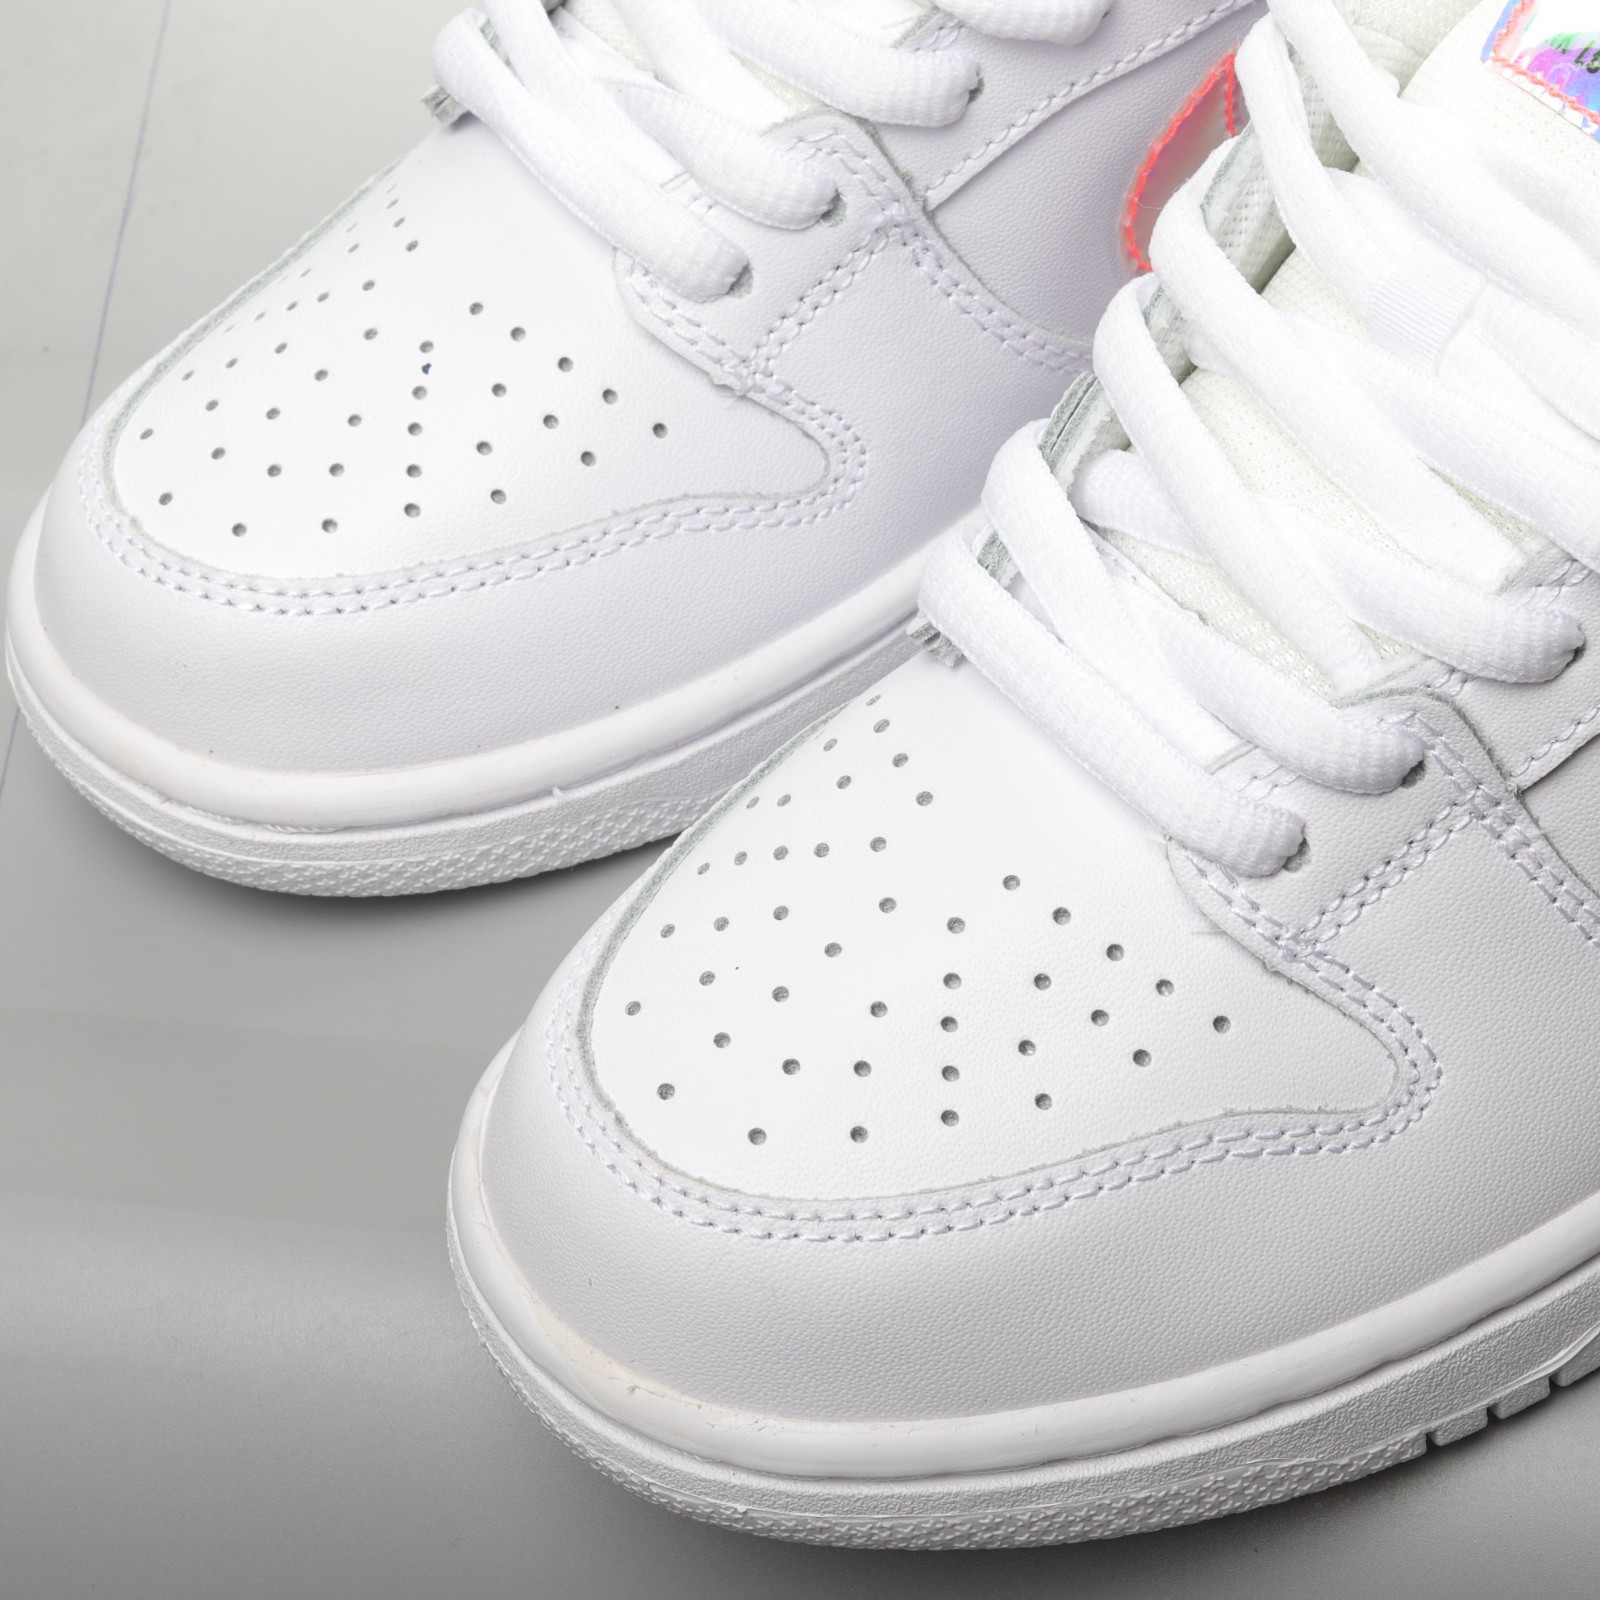 licentie Vergoeding eetbaar MultiscaleconsultingShops - Nike SB Dunk Low OG QS Have A Good Game White  CZ0710 - cheap nike boots in china store locations chicago - 191